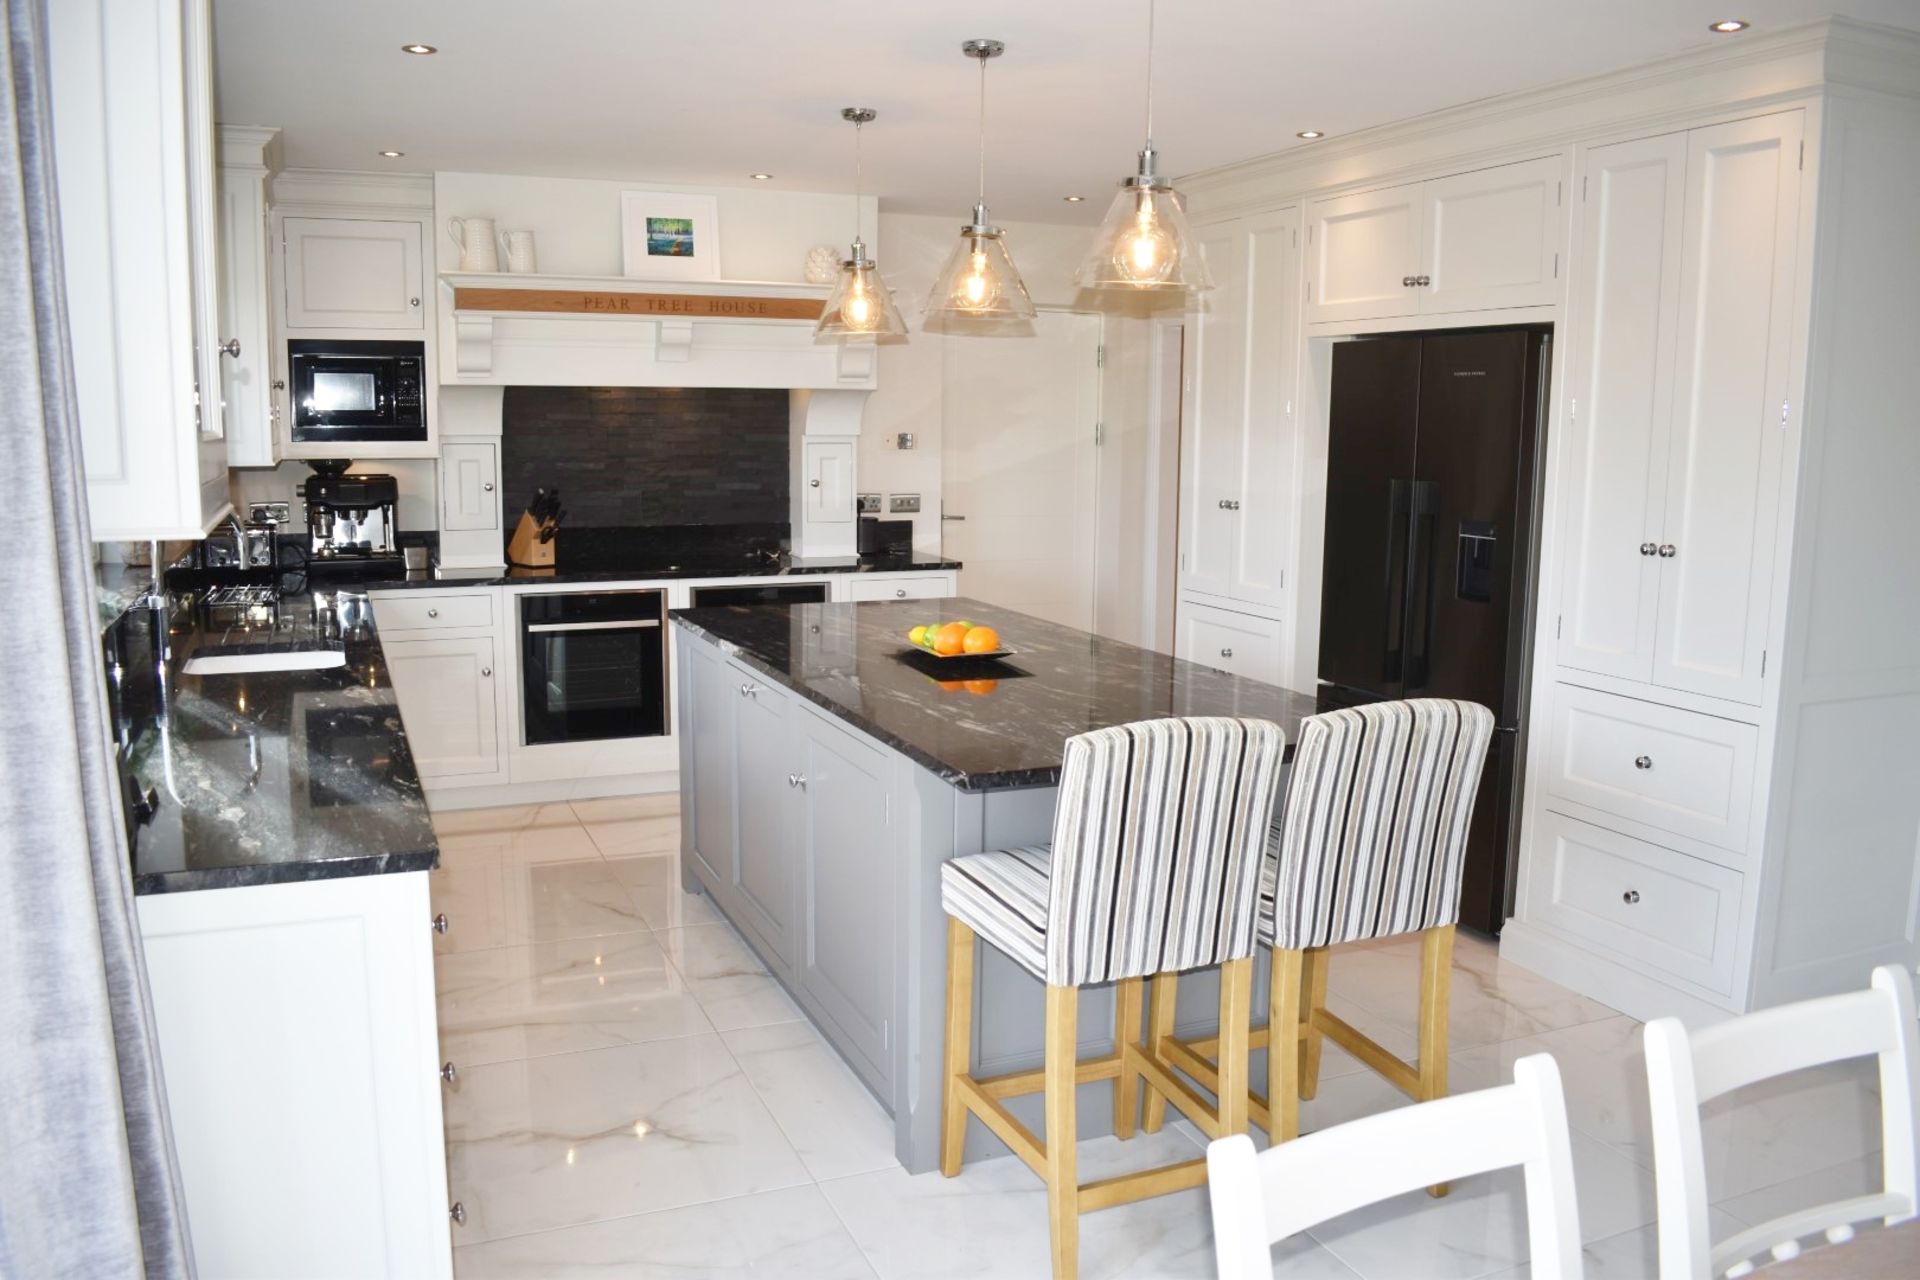 1 x Bespoke Handmade Framed Fitted Kitchen By Matthew Marsden Furniture - Features Hand Painted